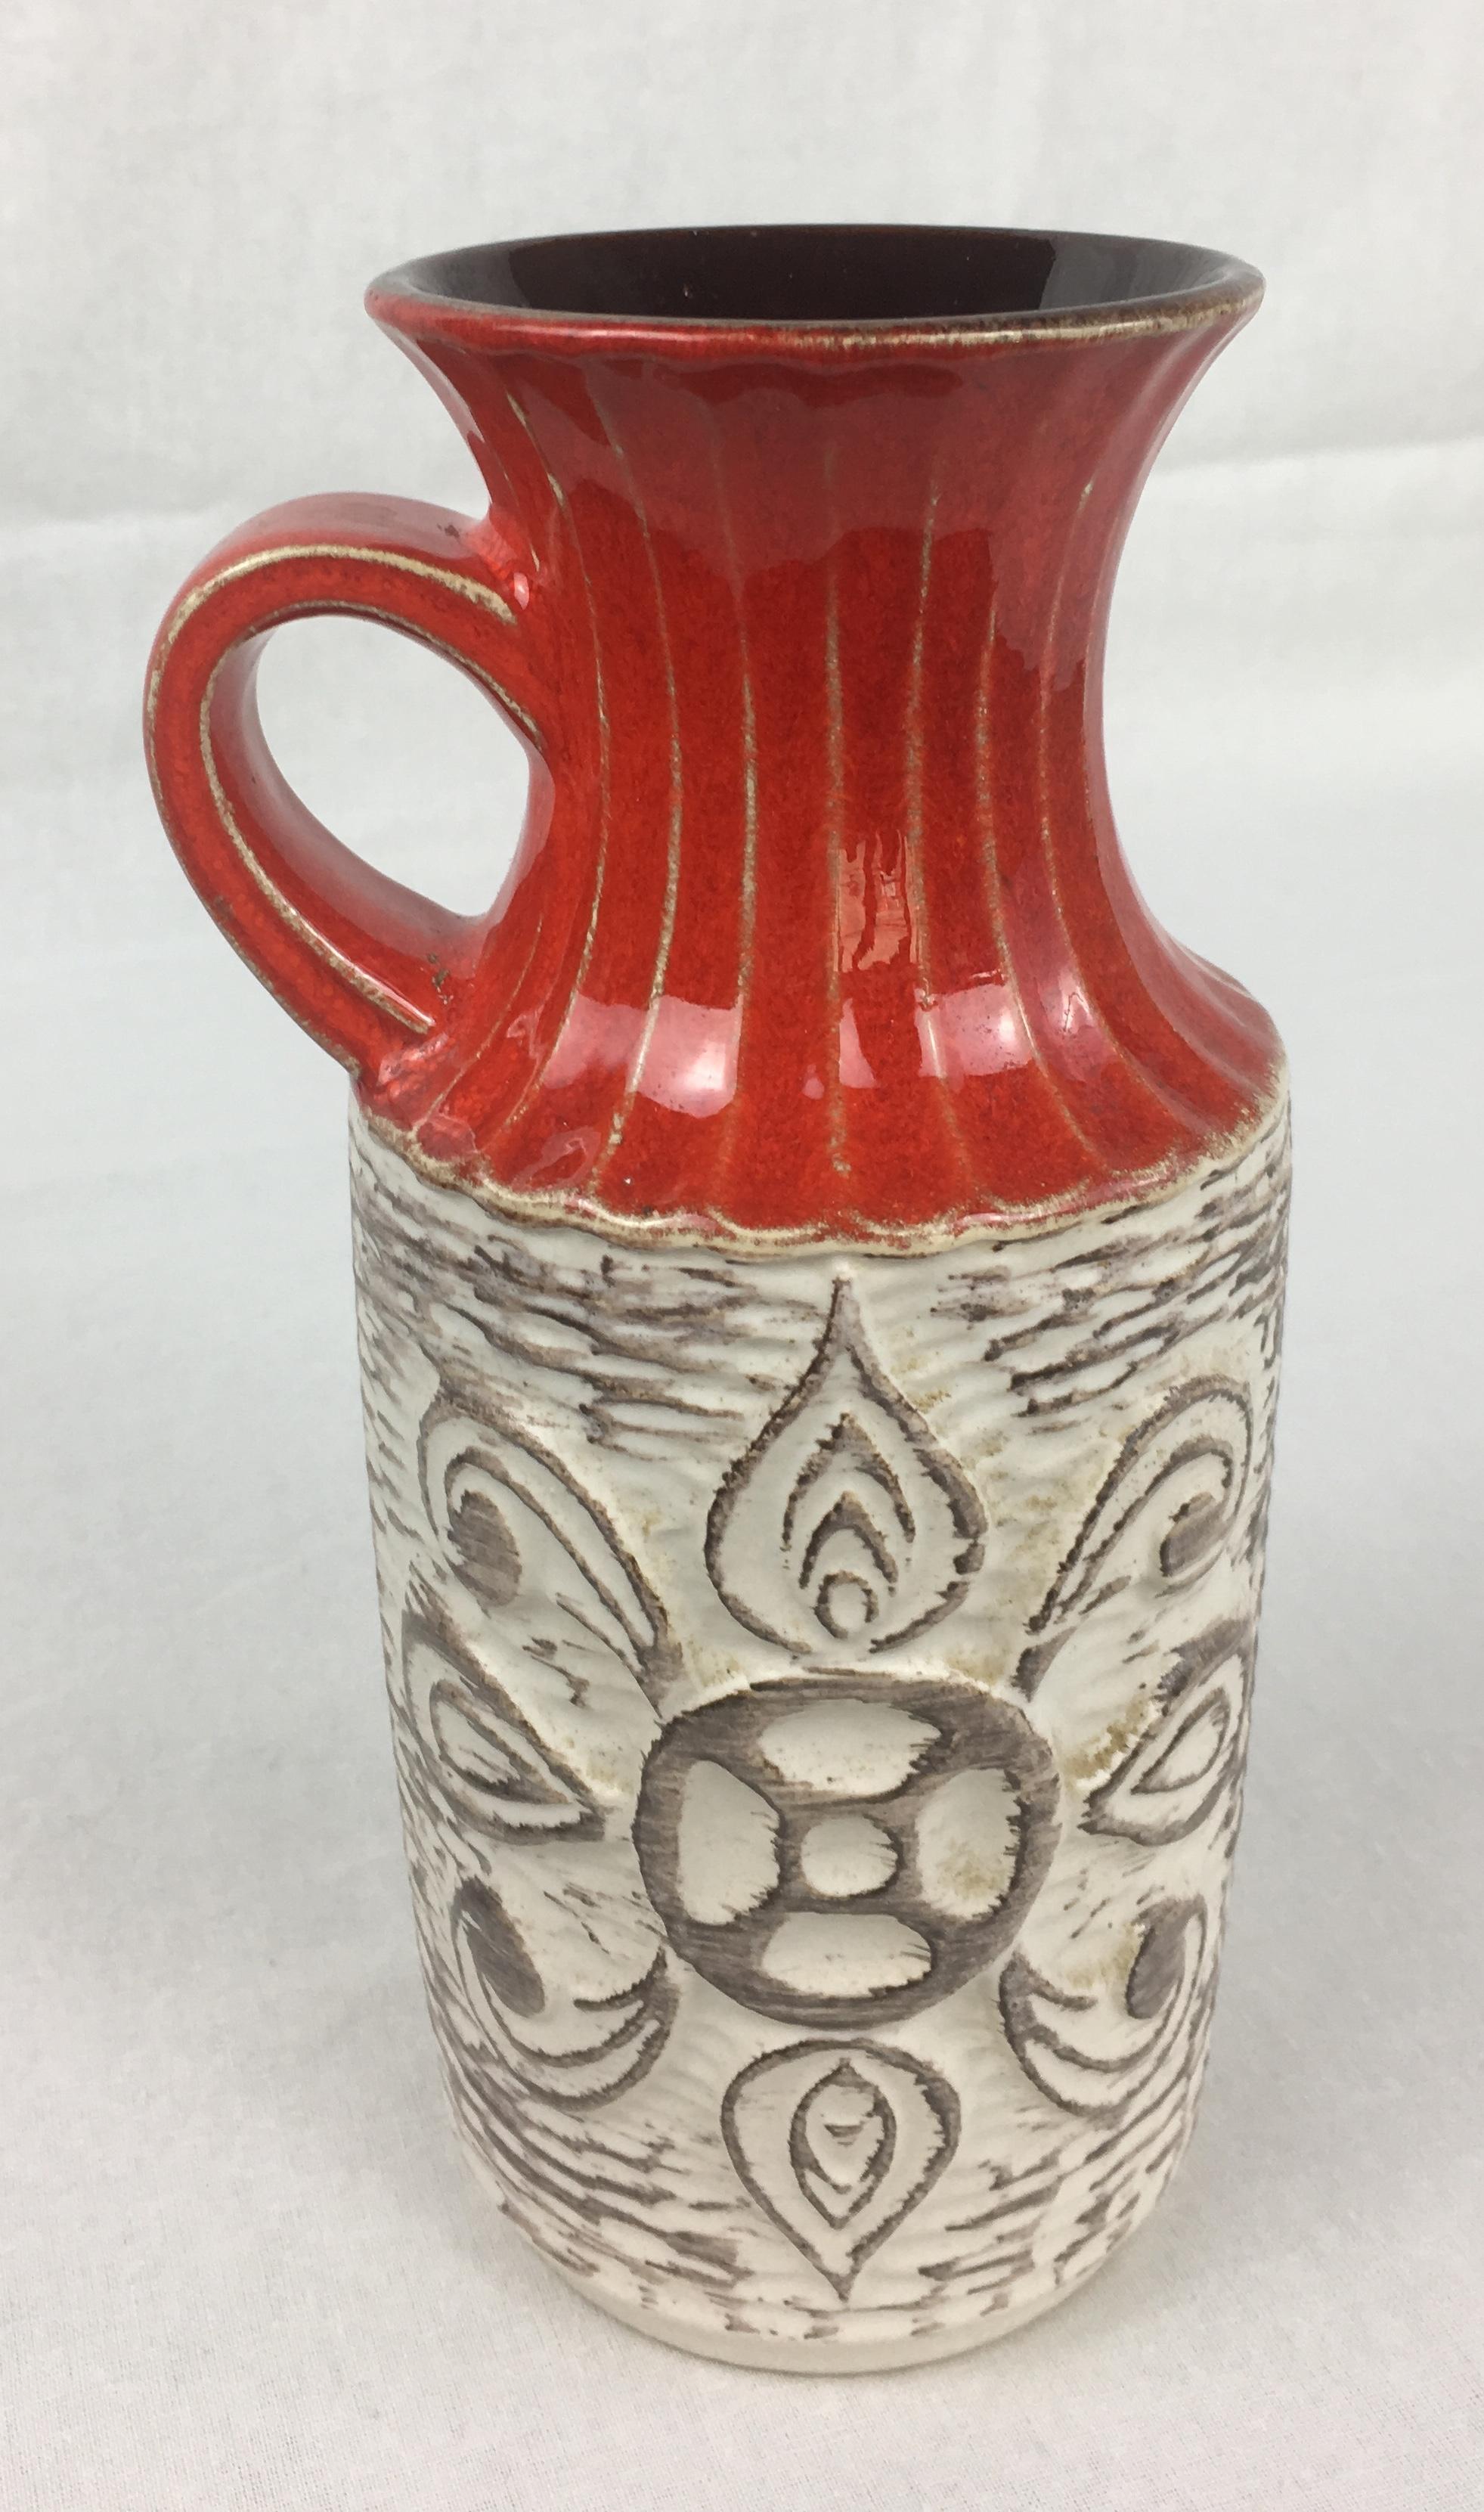 A fine Bay Keramik vase with stunning beige and red hues. This decorative object is unusual in the sense that it has a handle and the prominent carefully hand drawn designs of lines on the top in the red areas and centre scrolls make it particularly